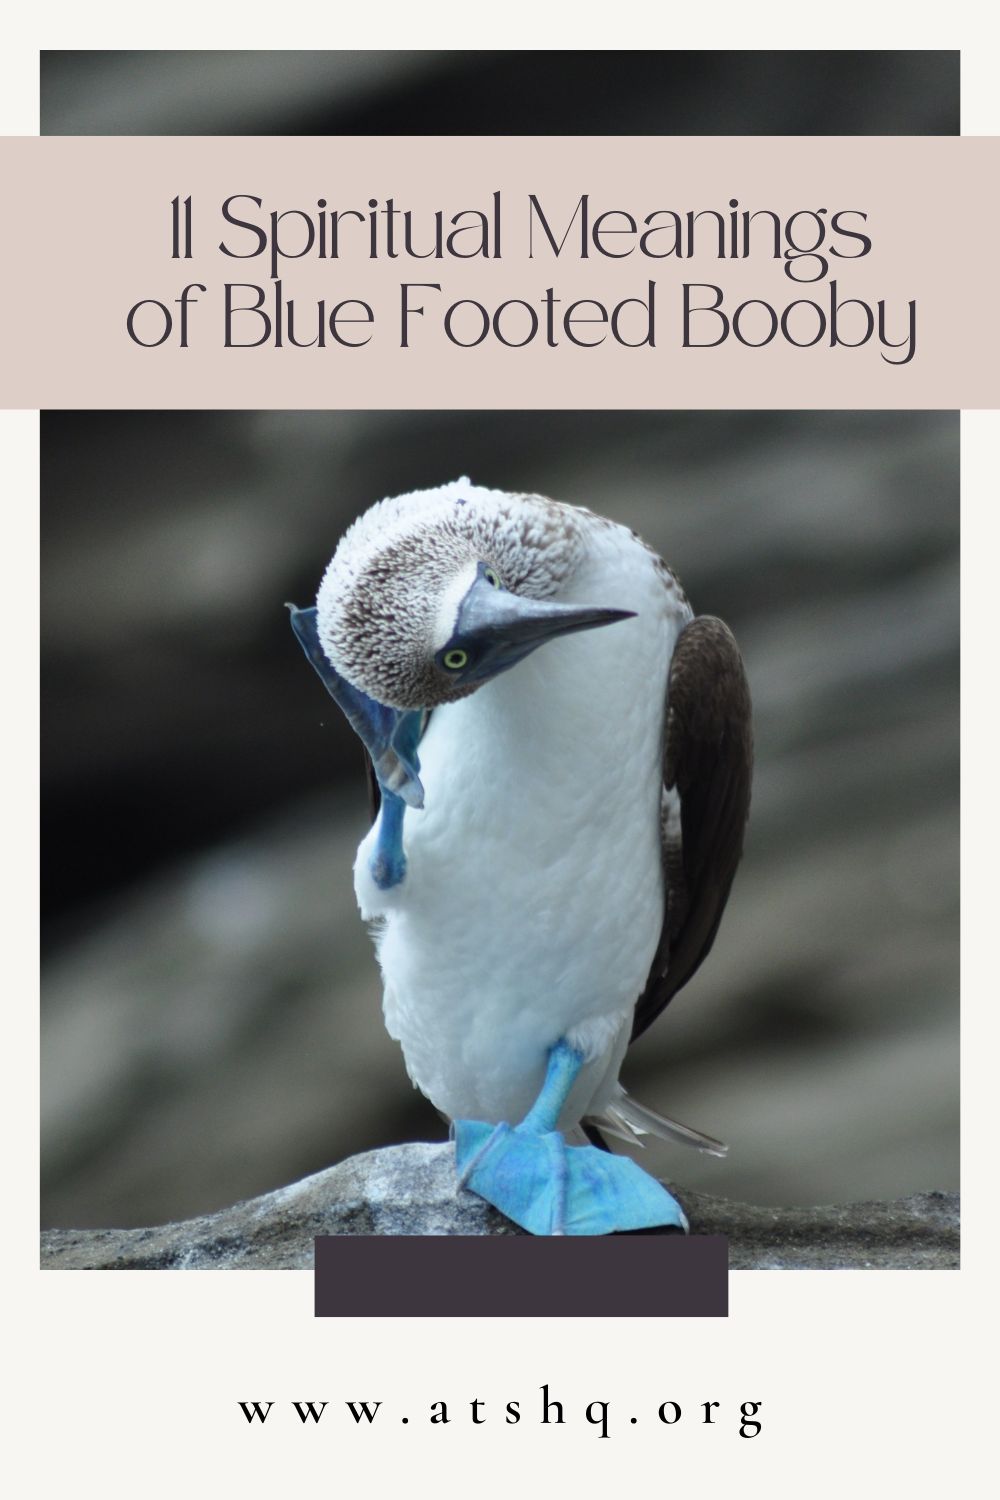 11 Spiritual Meanings of Blue Footed Booby